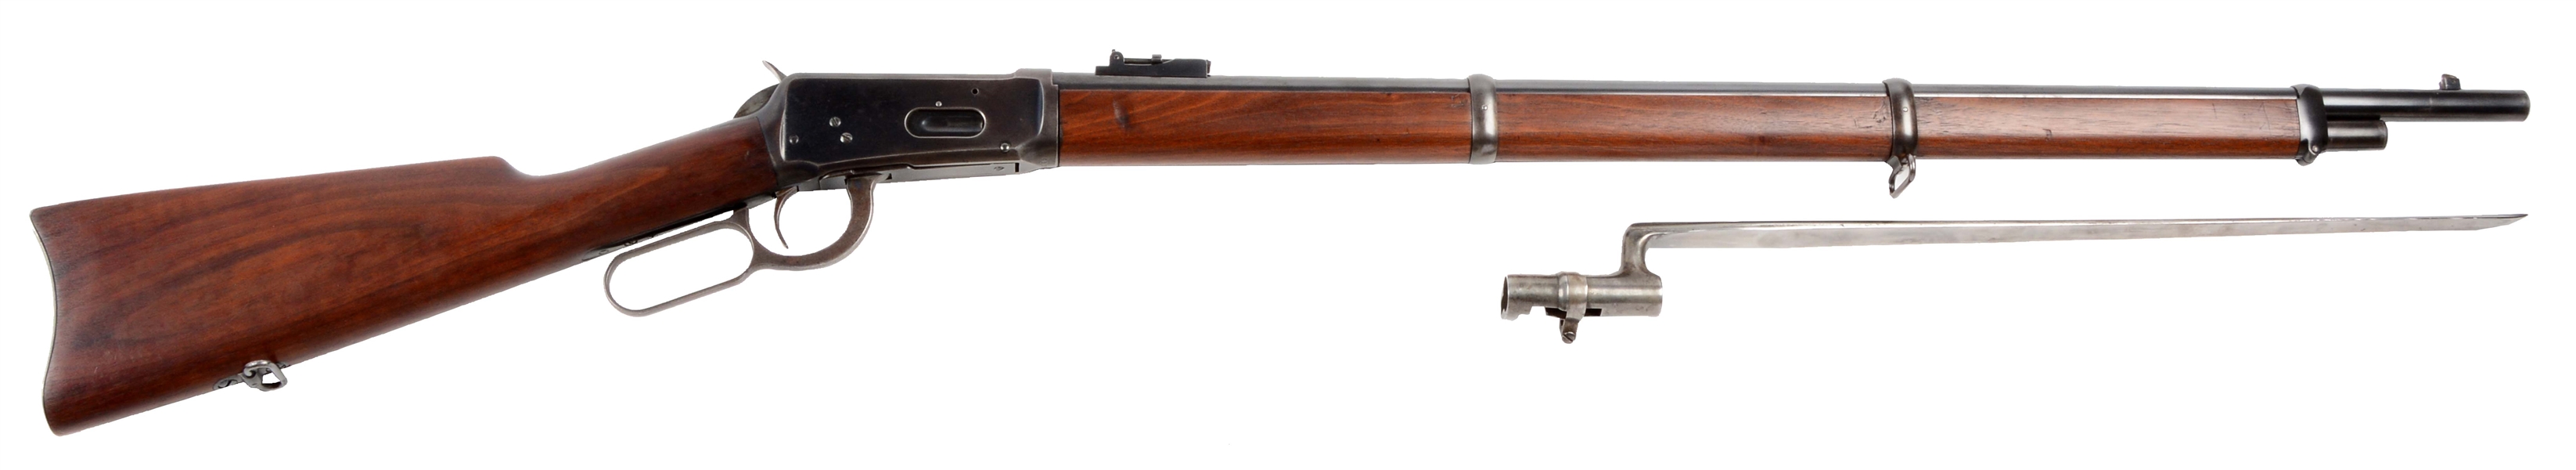 (C) WINCHESTER MODEL 1894 LEVER ACTION MUSKET - THE RAREST OF ALL WINCHESTER MUSKETS.